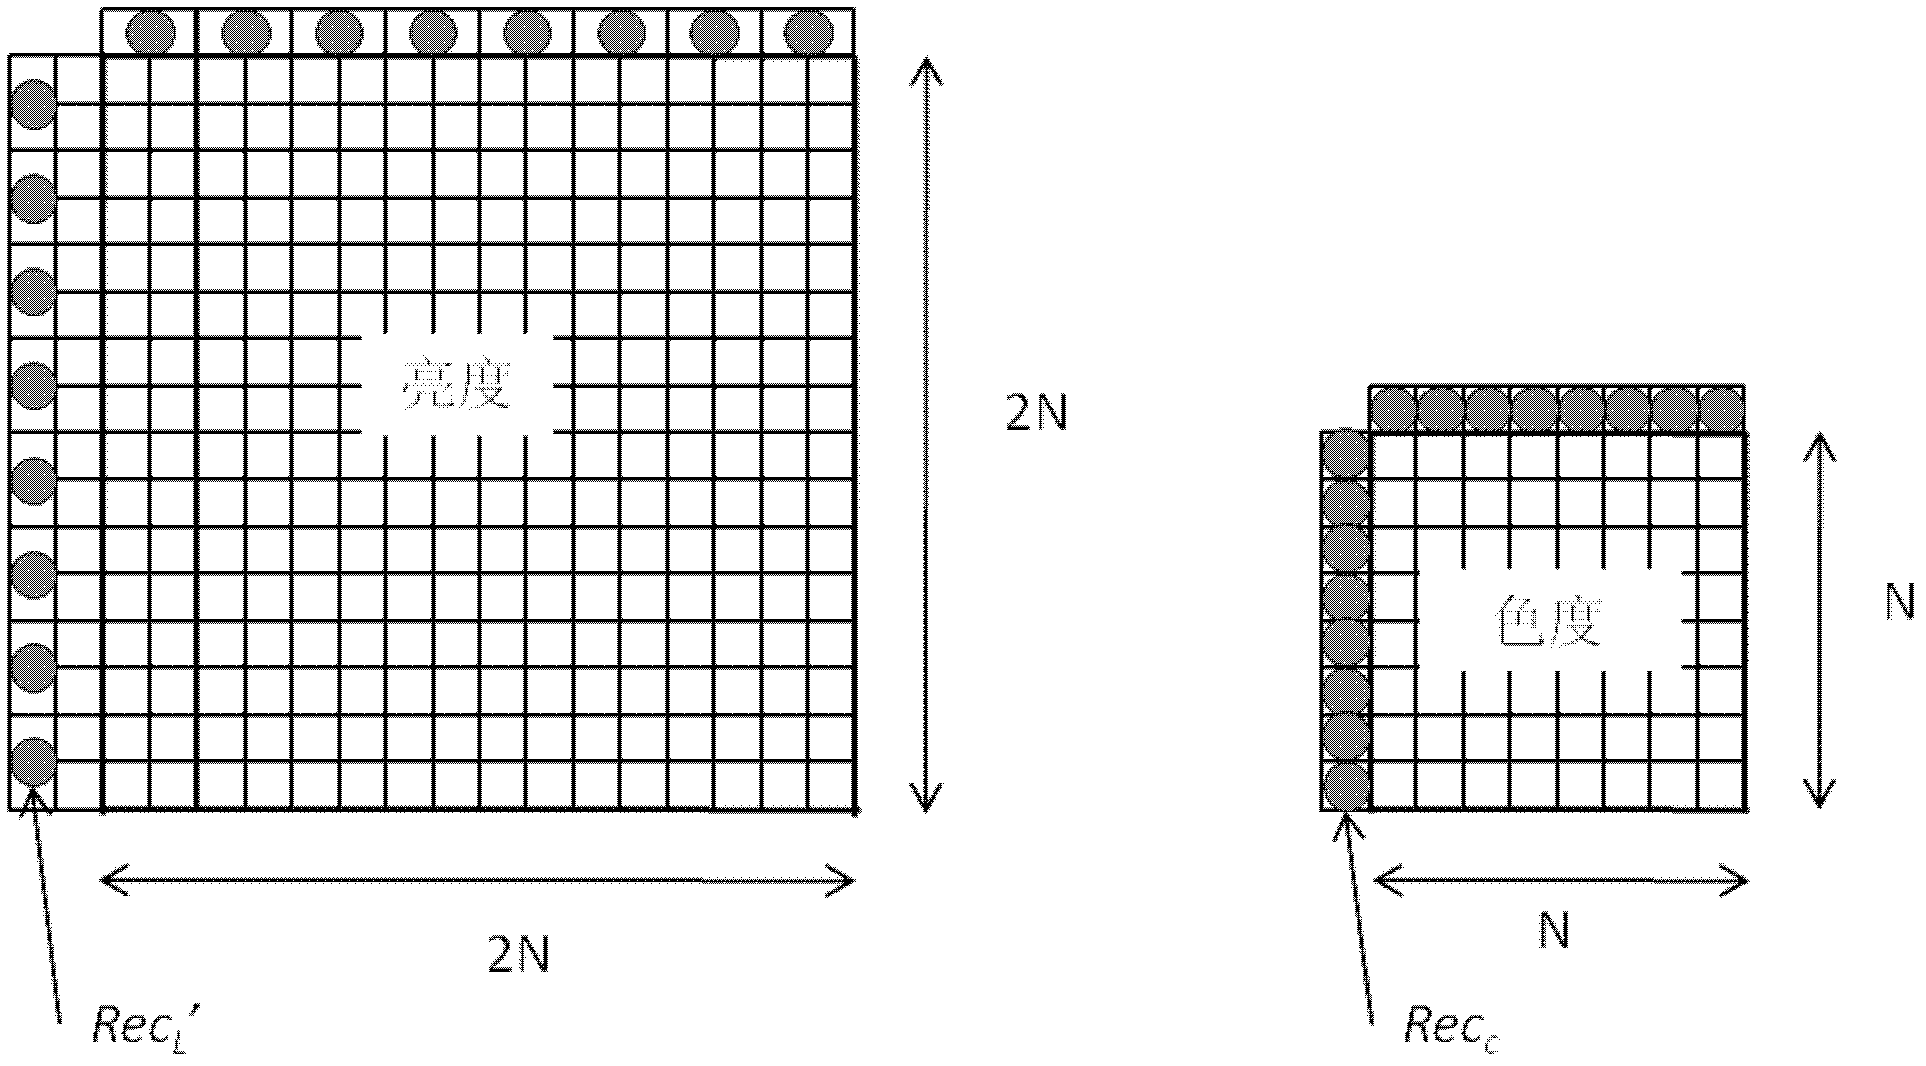 Intra-frame image predictive encoding and decoding method and video codec